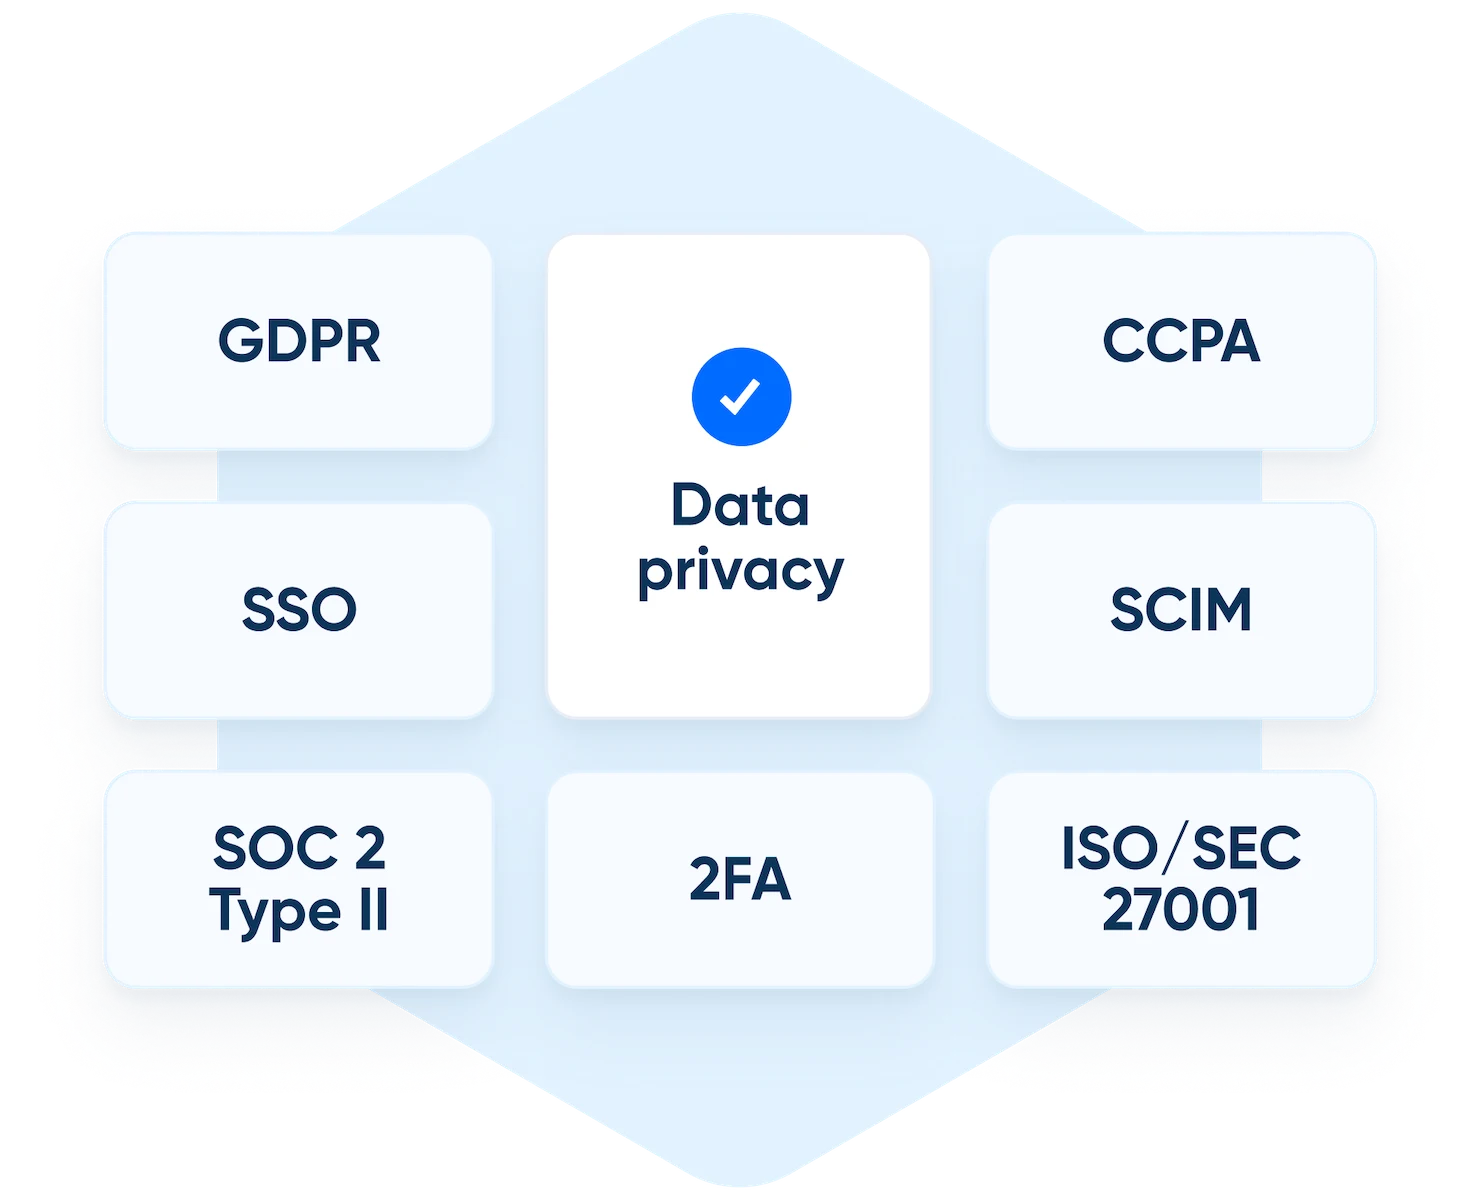 Graphic showing Calendly adheres to SEC regulations and meets the compliance needs of the world’s largest financial service companies, including FINRA, ISO/IEC 27001, SOC 2 Type 2, PCI, and GDPR.